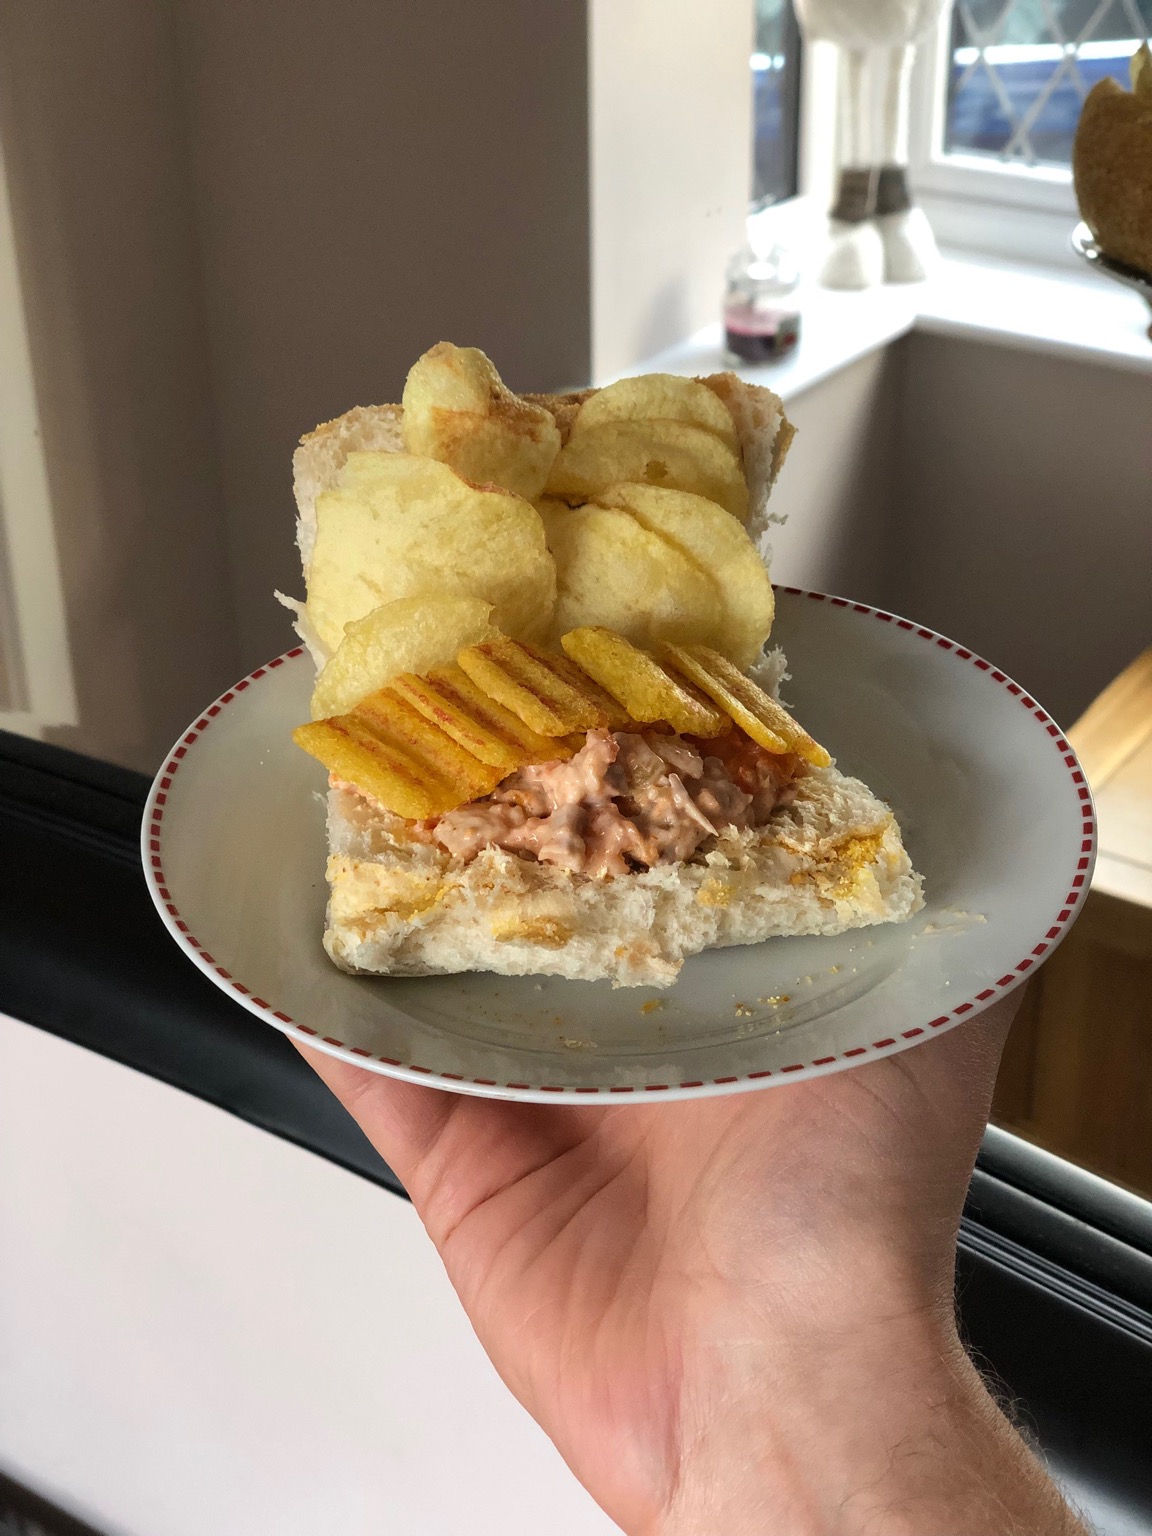 Crisps, Frazzles and more in an open white roll